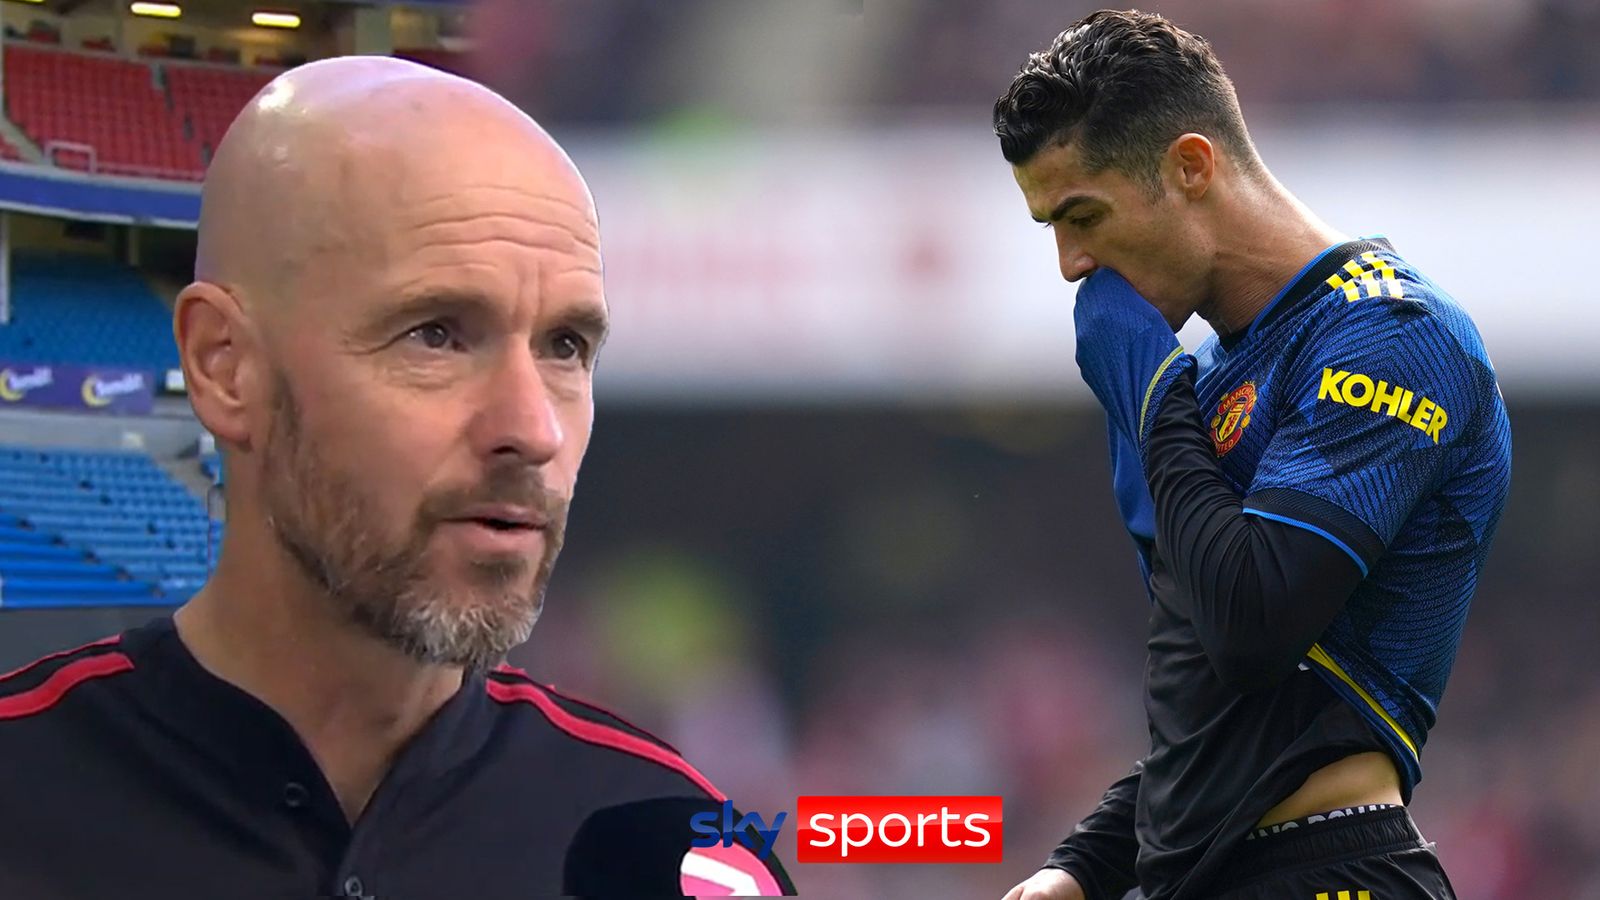 Cristiano Ronaldo's Old Trafford exit 'unacceptable', says Manchester United manager Erik ten Hag